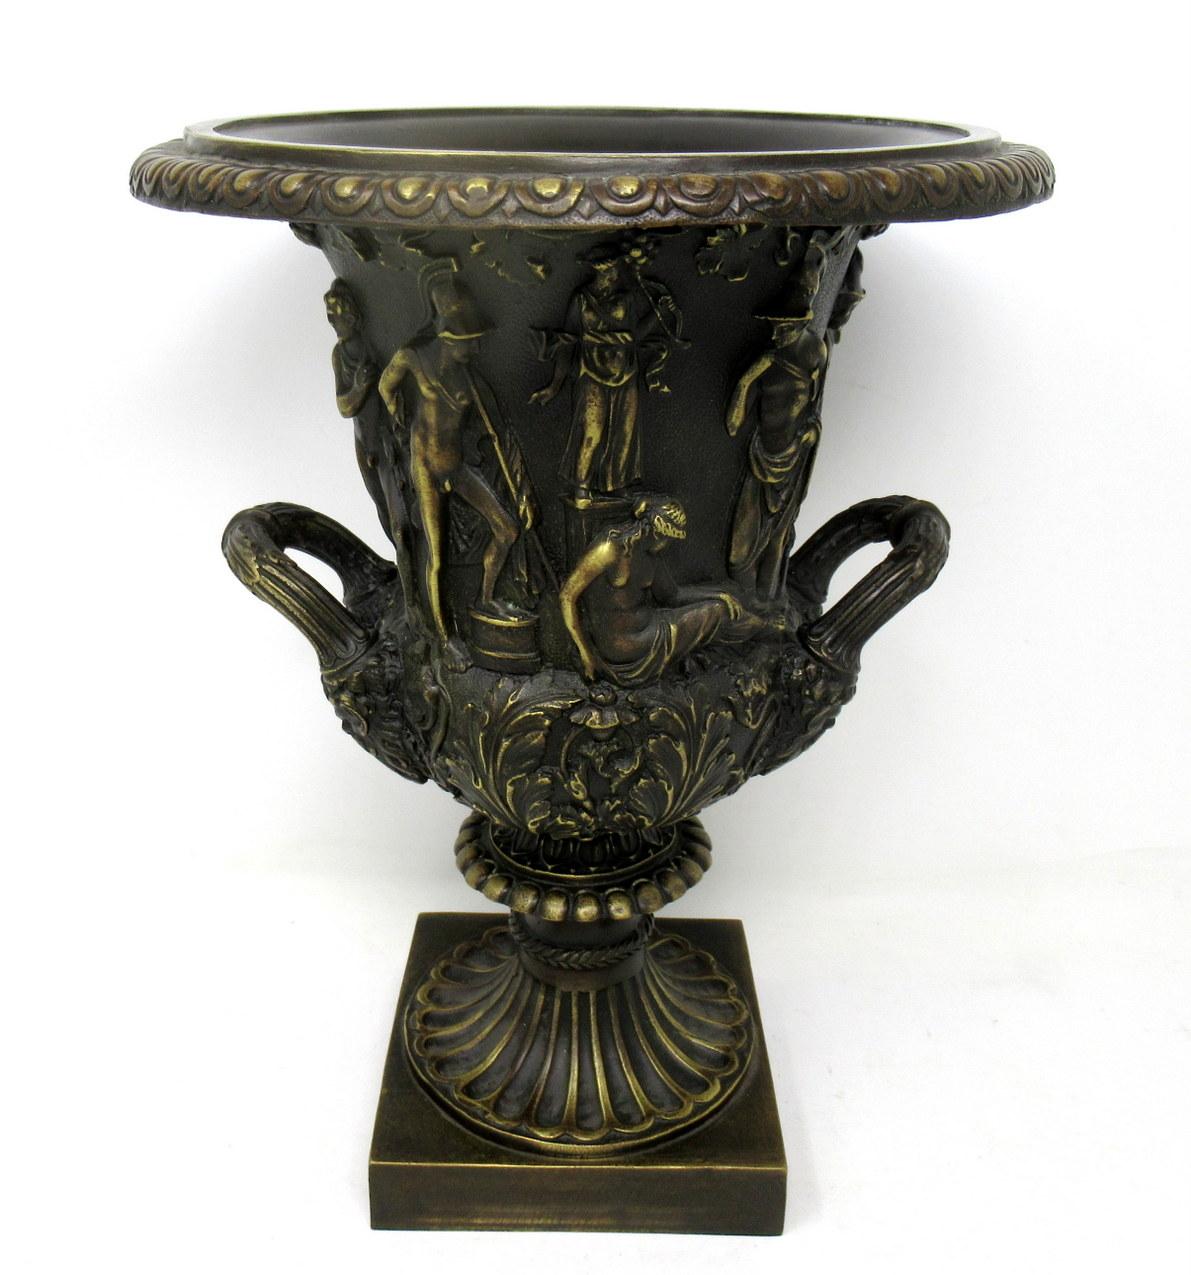 French Antique Pair of Grand Tour Style Borghese or Medici Bronze Campana Urns Vases